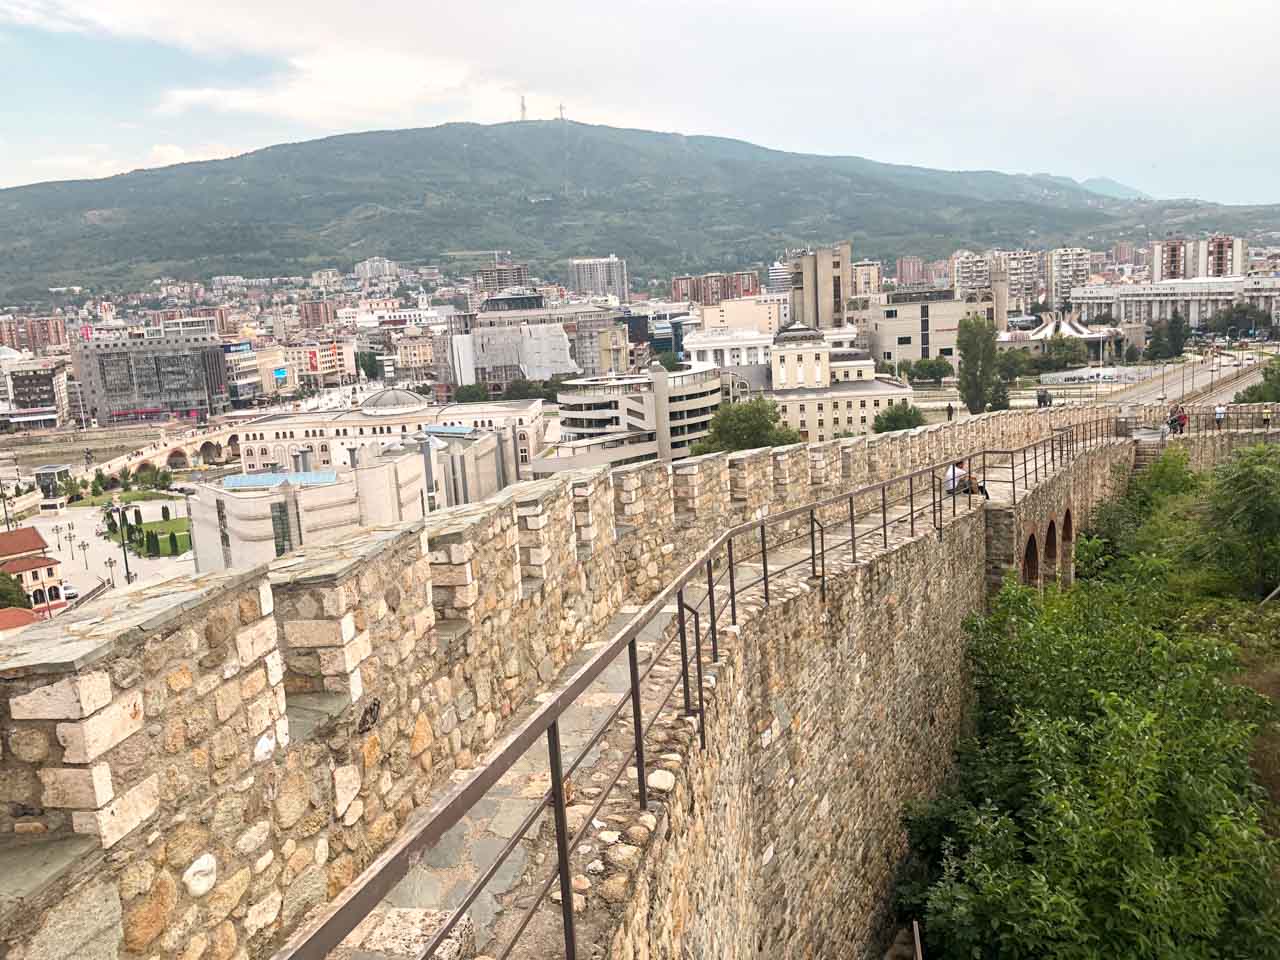 Path along the walls of the Skopje Fortress (Kale) with the panorama of the city in the background